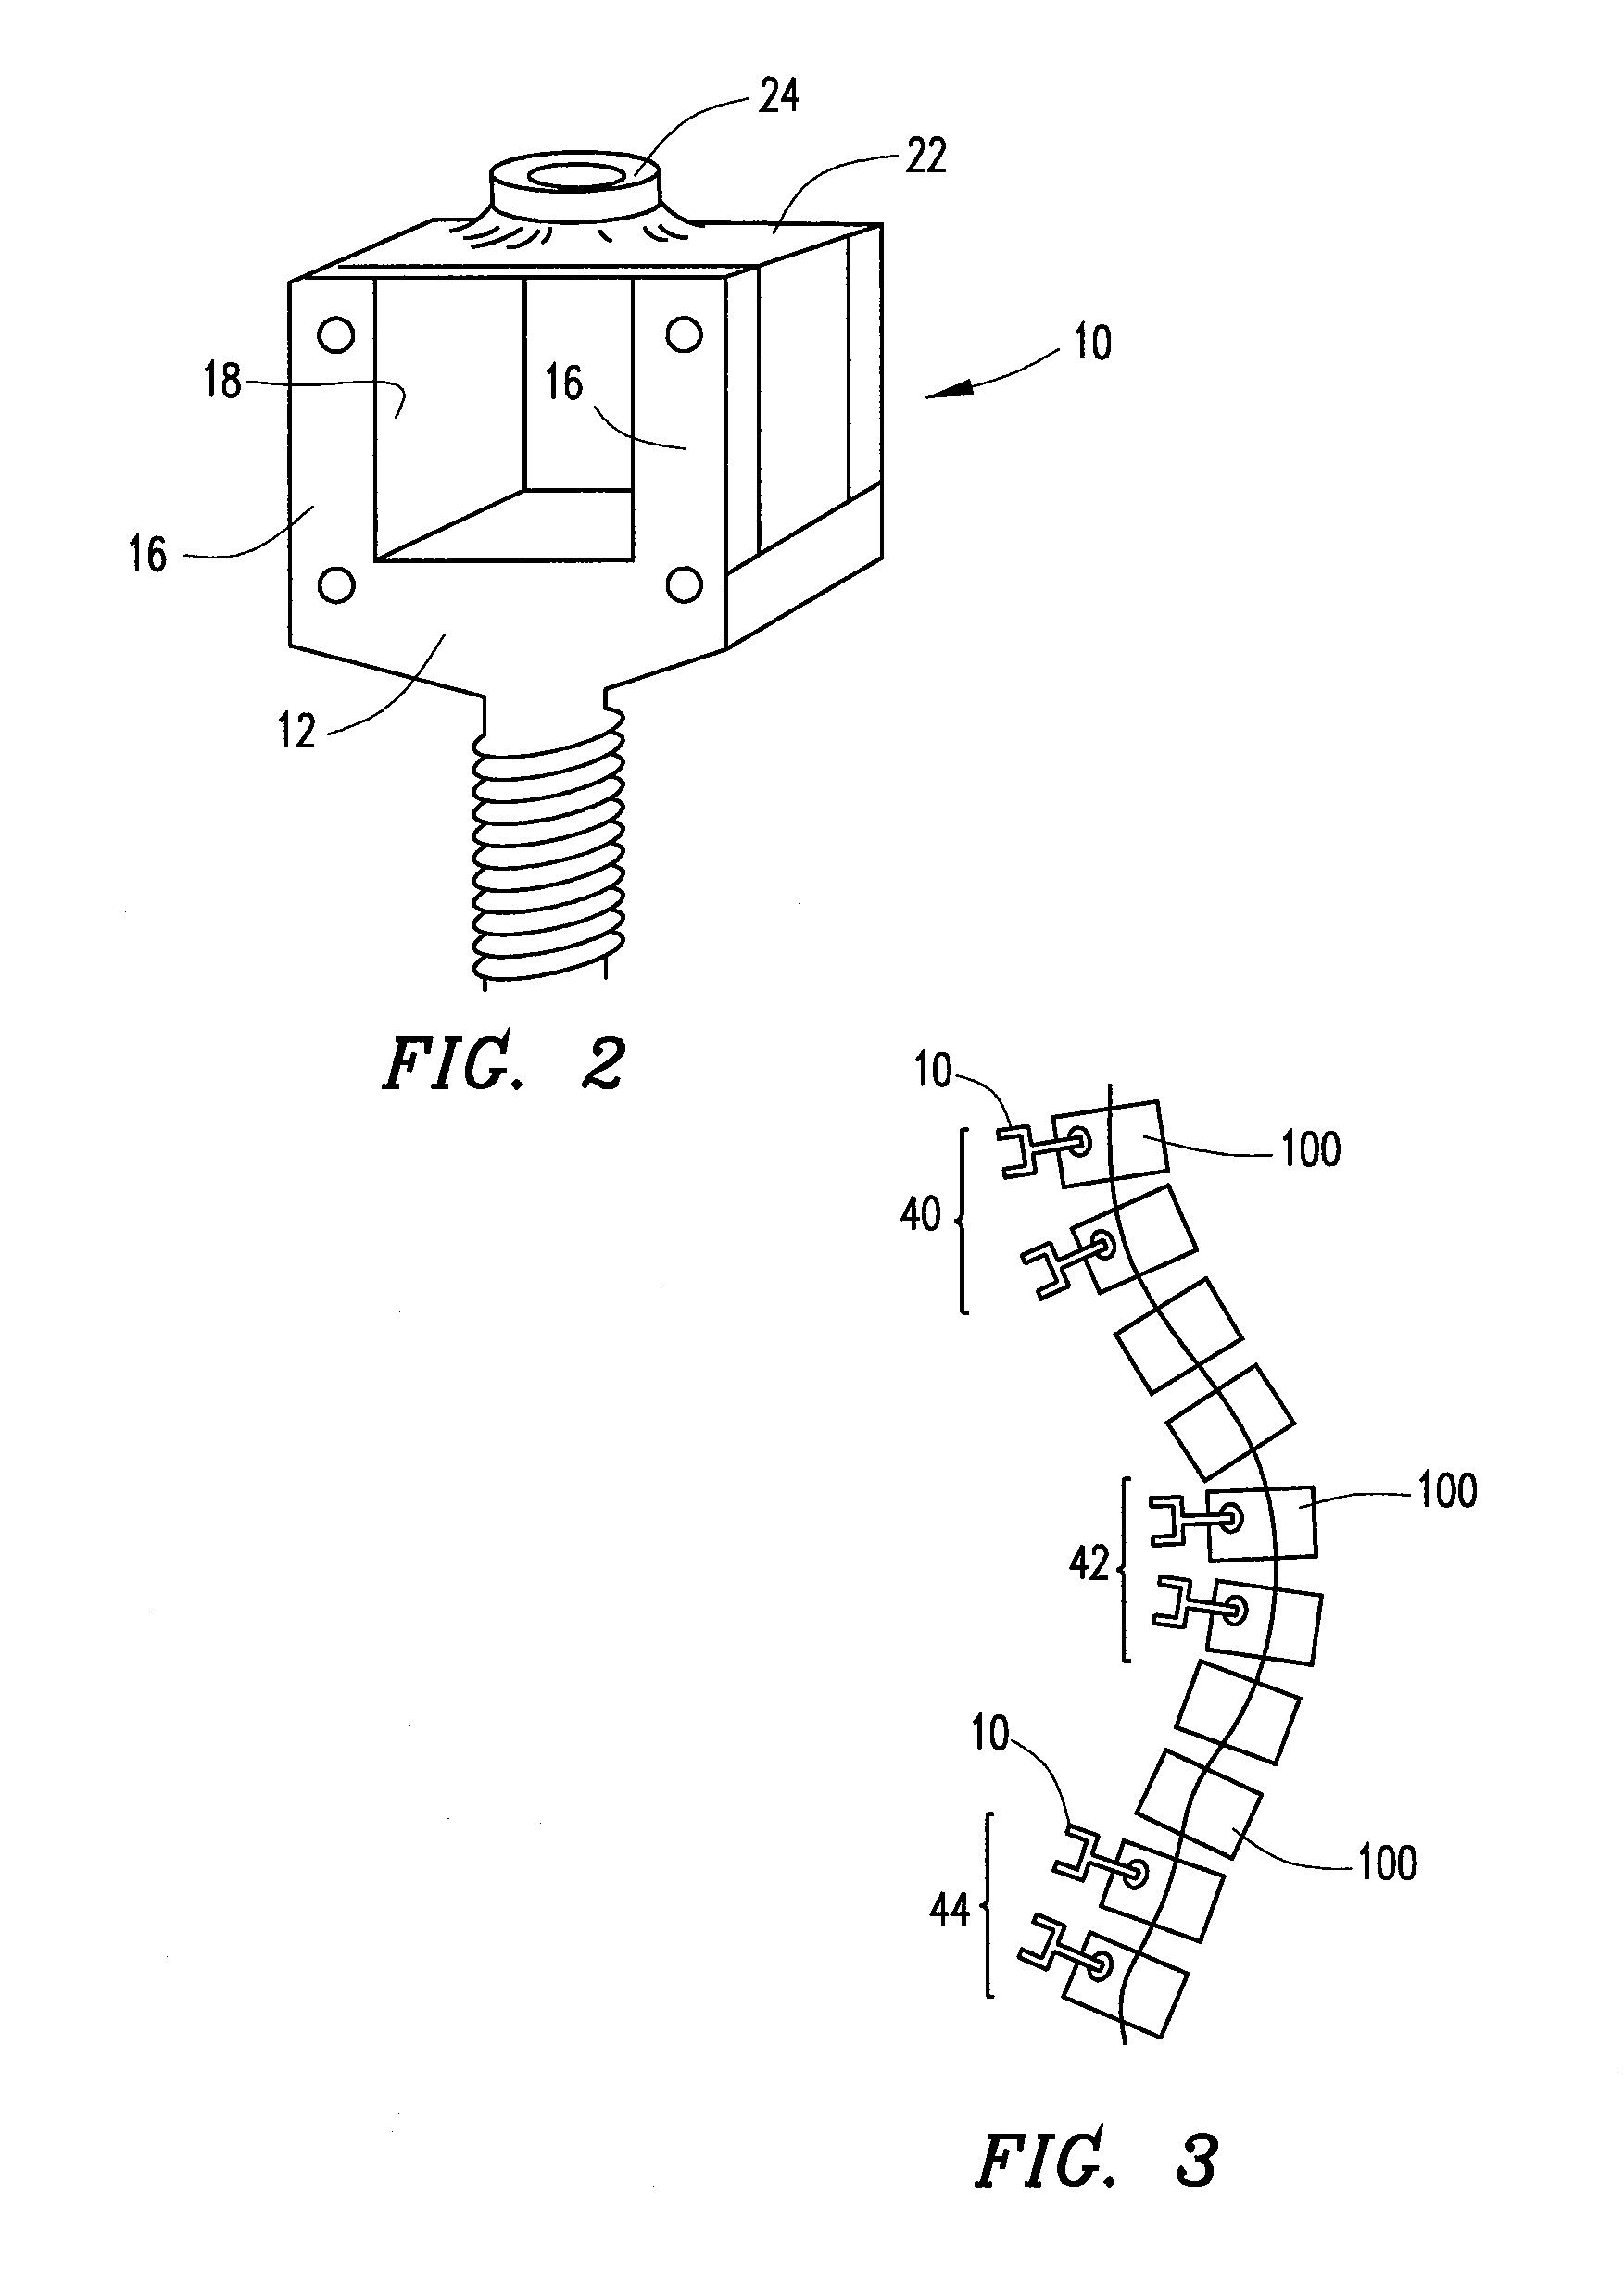 System and method for aligning vertebrae in the amelioration of aberrant spinal column deviation conditions in patients requiring the accomodation of spinal column growth or elongation